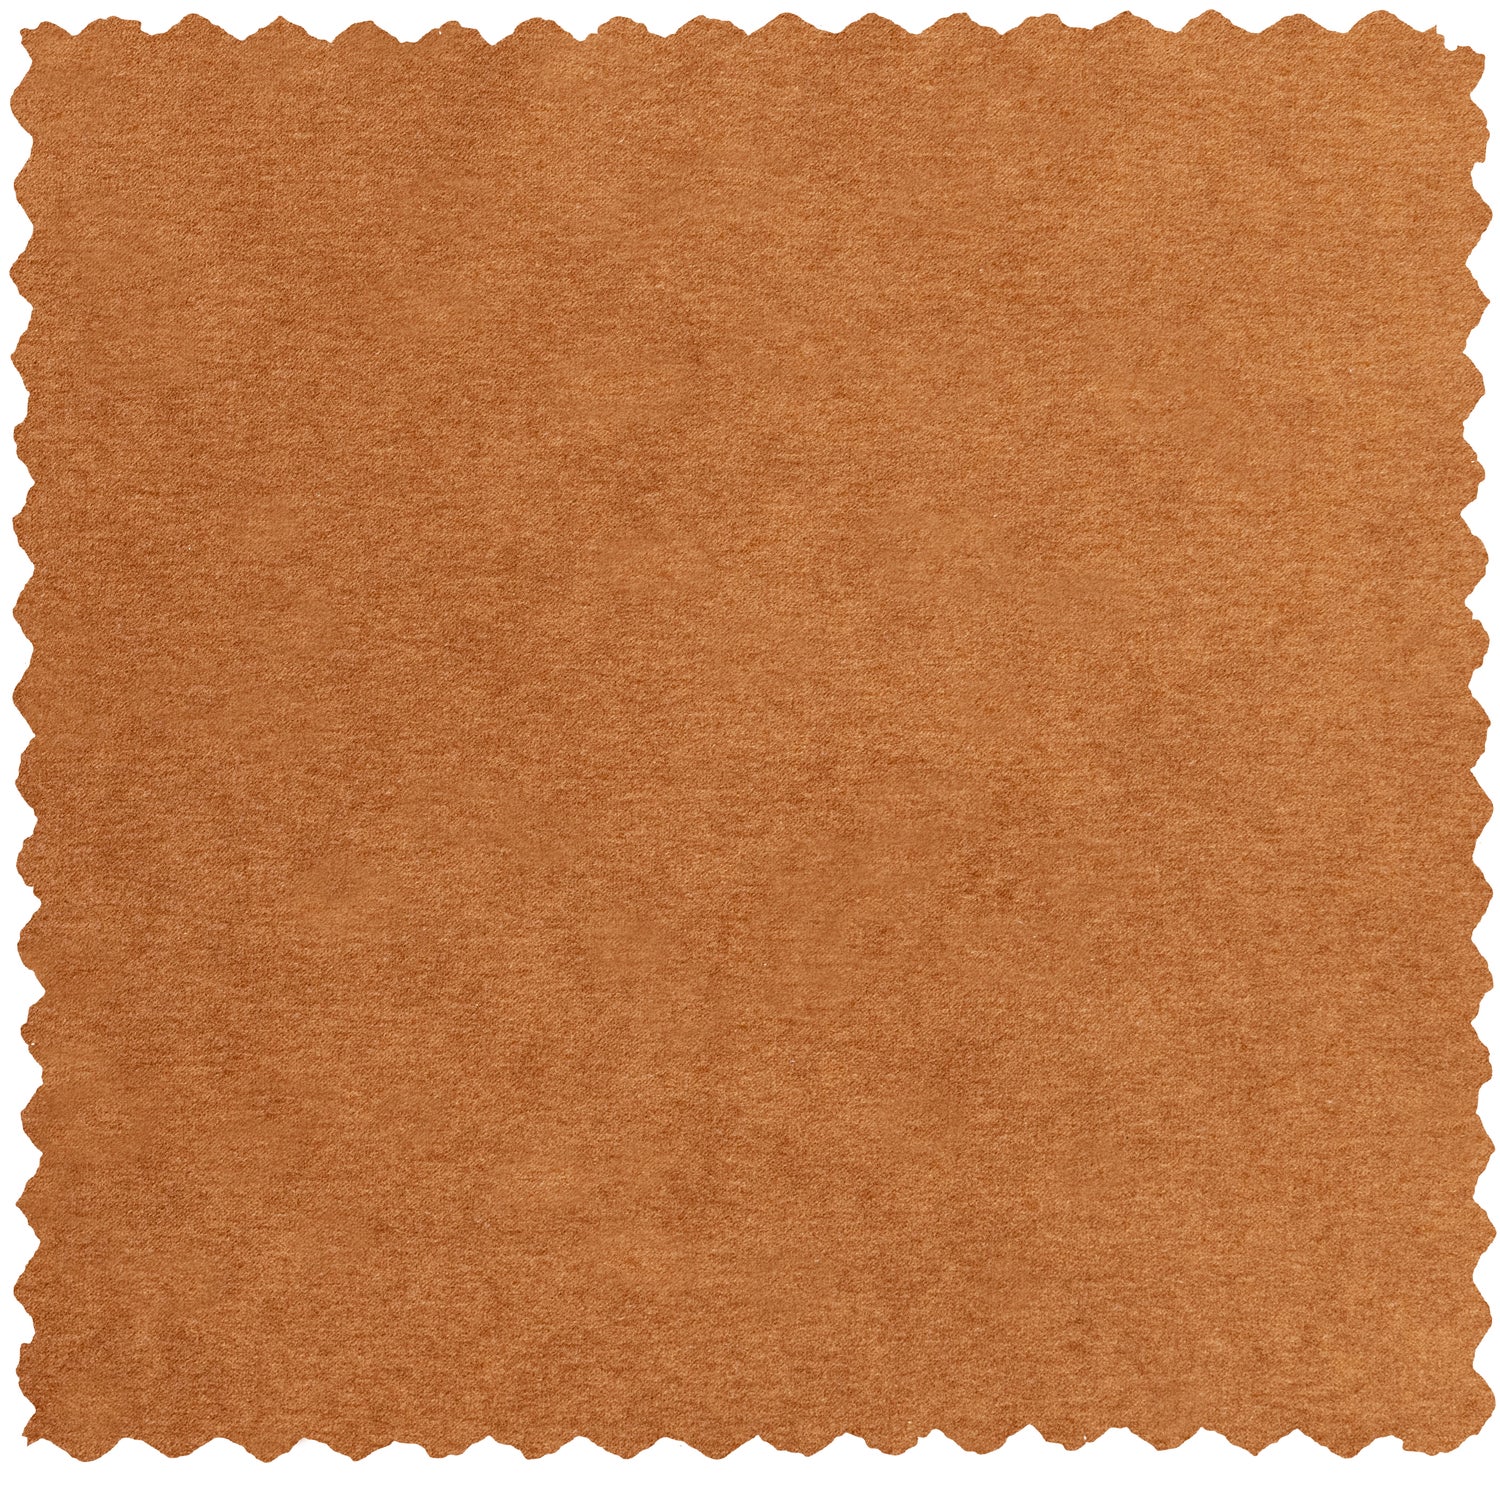 OPAL_409_CINNAMON_LOMA_WASHED_VELVET.jpg?auto=webp&format=png&width=1500&height=1500